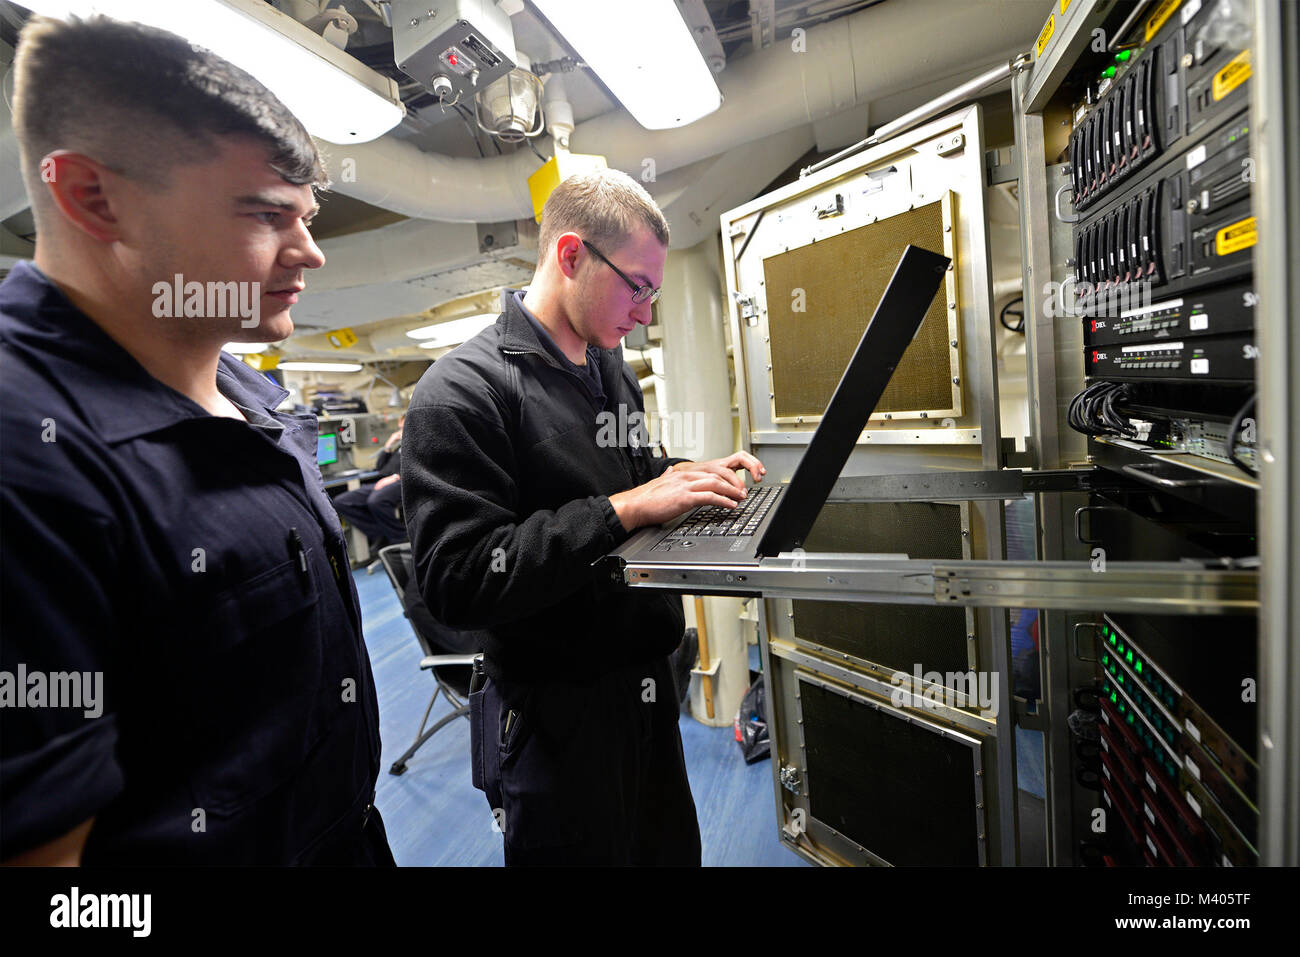 180205-N-ZU710-010  Atlantic Ocean (February 5, 2018) Sonar Technician 3rd Class Matt Mickinak and Sonar Technician Seaman David Cooper perform maintenance on sonar control equipment aboard the Arleigh Burke-class guided-missile destroyer USS Winston S. Churchill (DDG 81). Churchill is underway as part of the Harry S. Truman Carrier Strike Group (HSTCSG) conducting a Composite Training Unit Exercise (COMPTUEX), which evaluates the strike group's ability as a whole to carry out sustained combat operations from the sea, ultimately certifying the HSTCSG for deployment. (U.S. Navy Photo by Mass Co Stock Photo